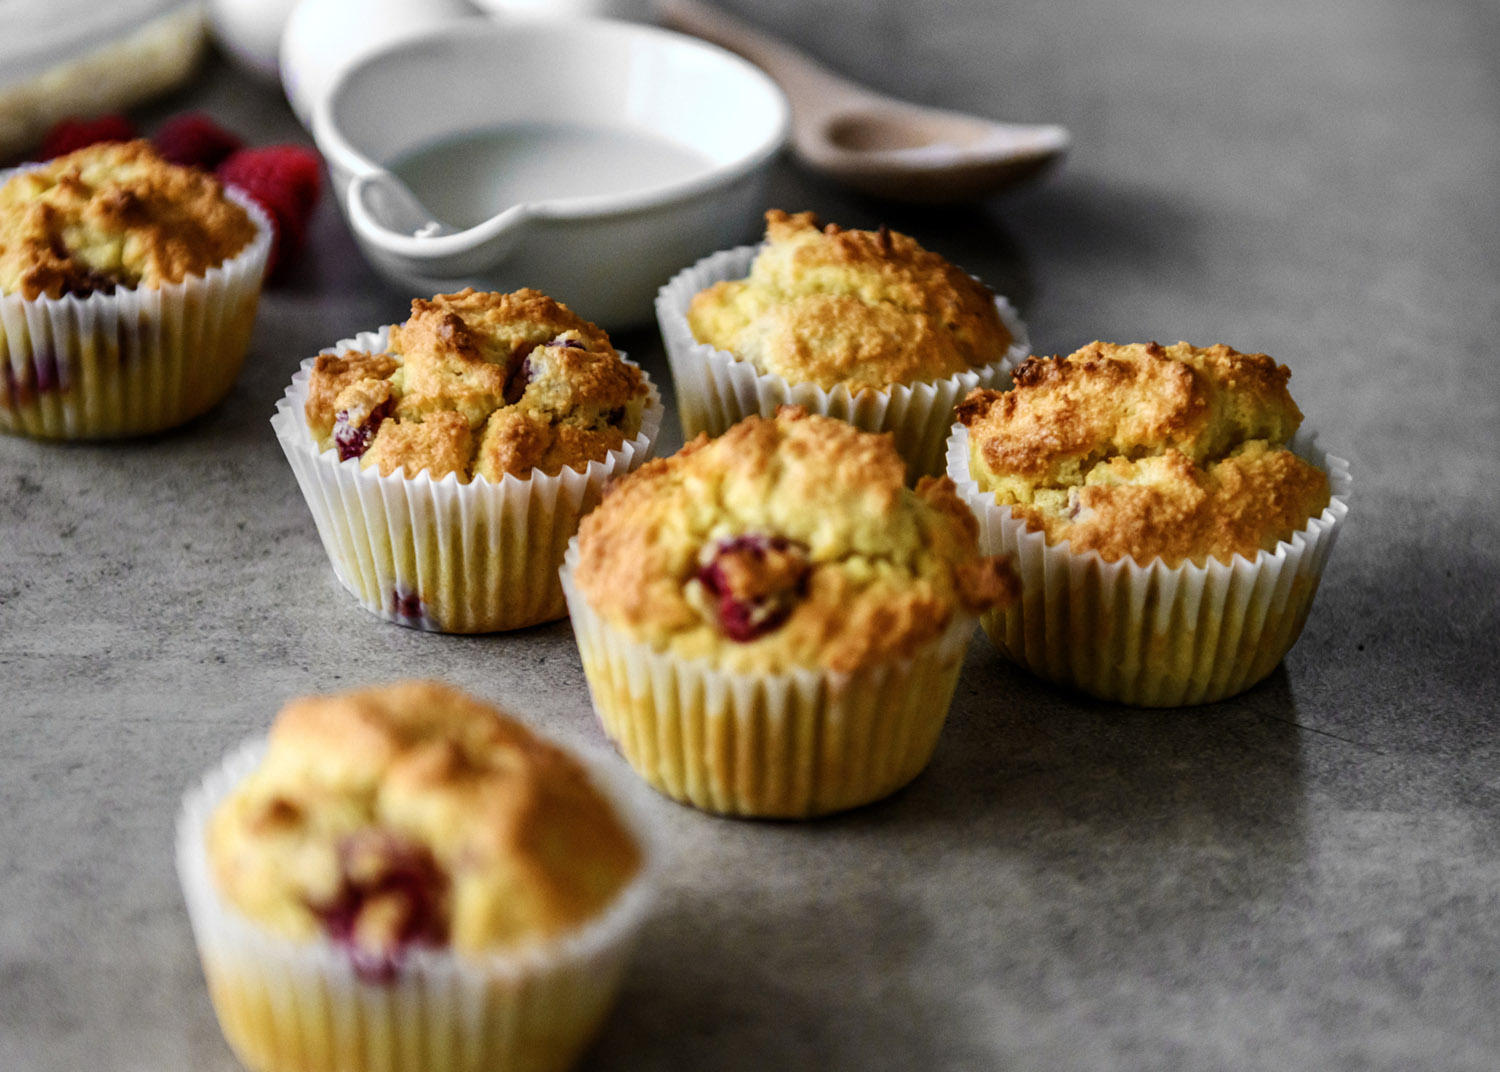 Keto muffins, with almond flour, rapberries, eggs and almond milk, Quebec, Canada